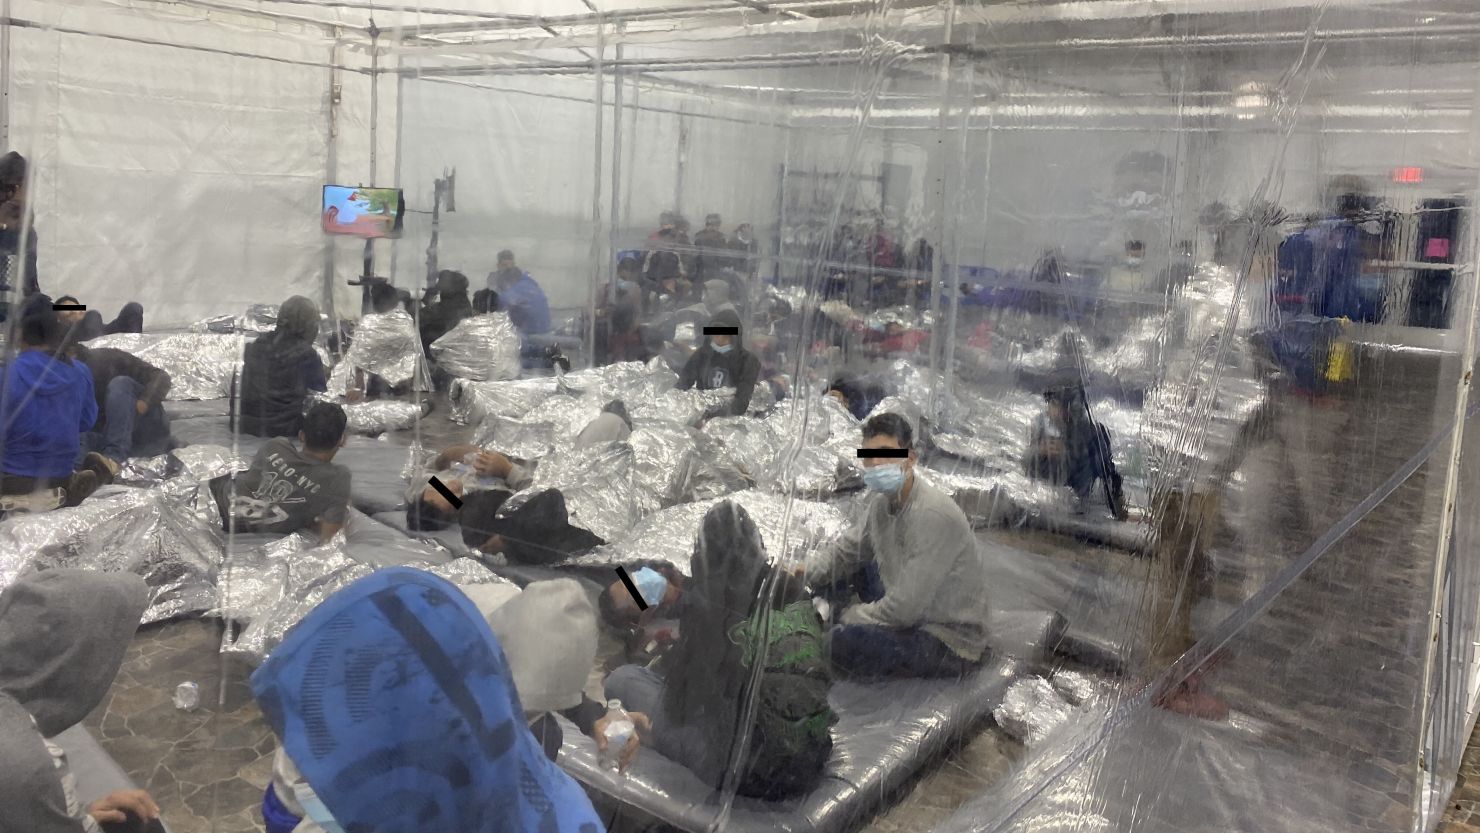 Photos released by Democratic Rep. Henry Cuellar's office show conditions inside a USCBP facility in Donna, Texas, over the weekend. 